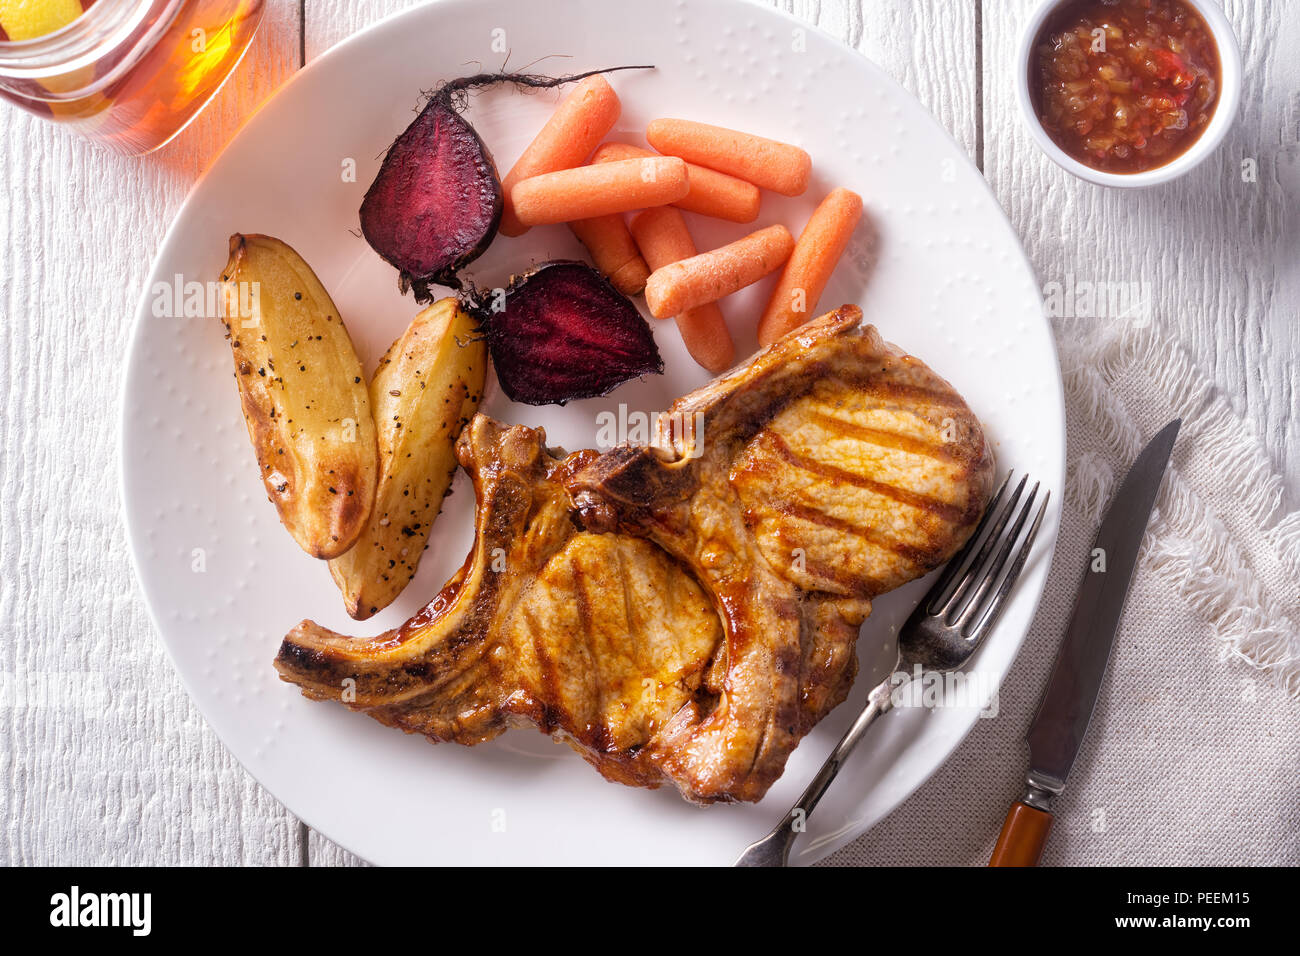 Delicious barbecue grilled pork chops with roasted potato, roasted beets, carrots and relish. Stock Photo